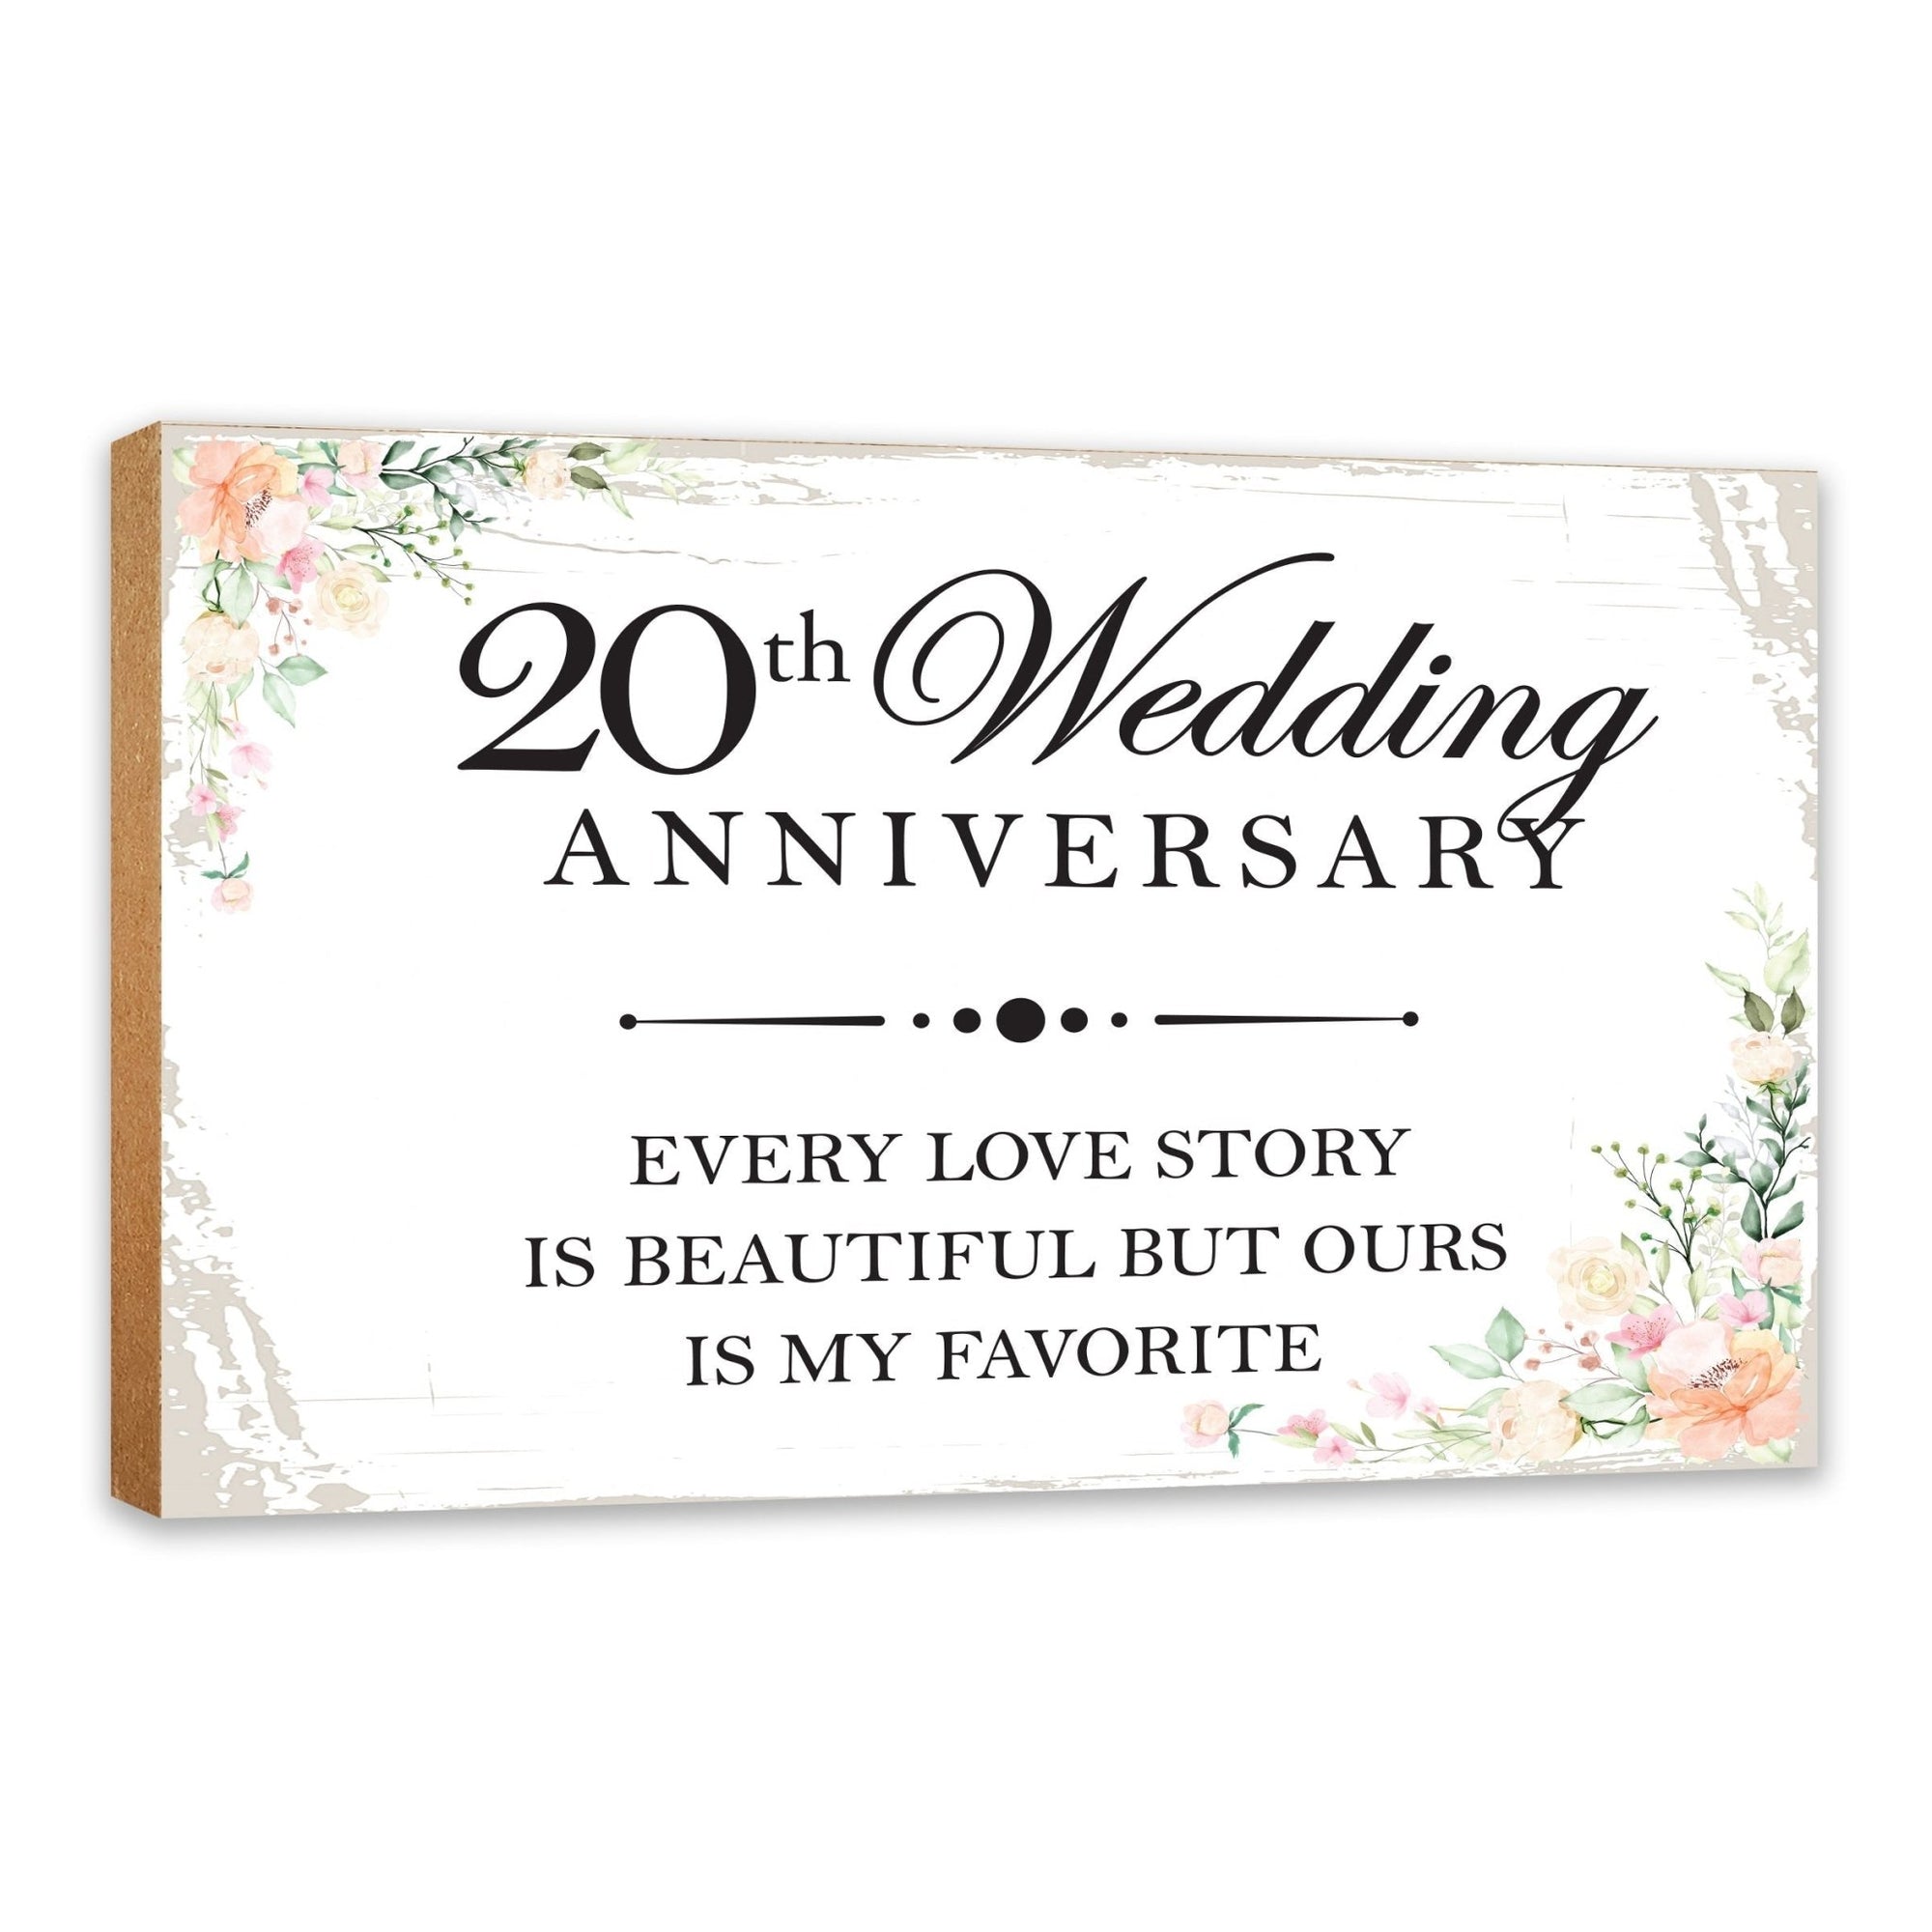 20th Wedding Anniversary Unique Shelf Decor and Tabletop Signs Gifts for Couples - Every Love Story - LifeSong Milestones